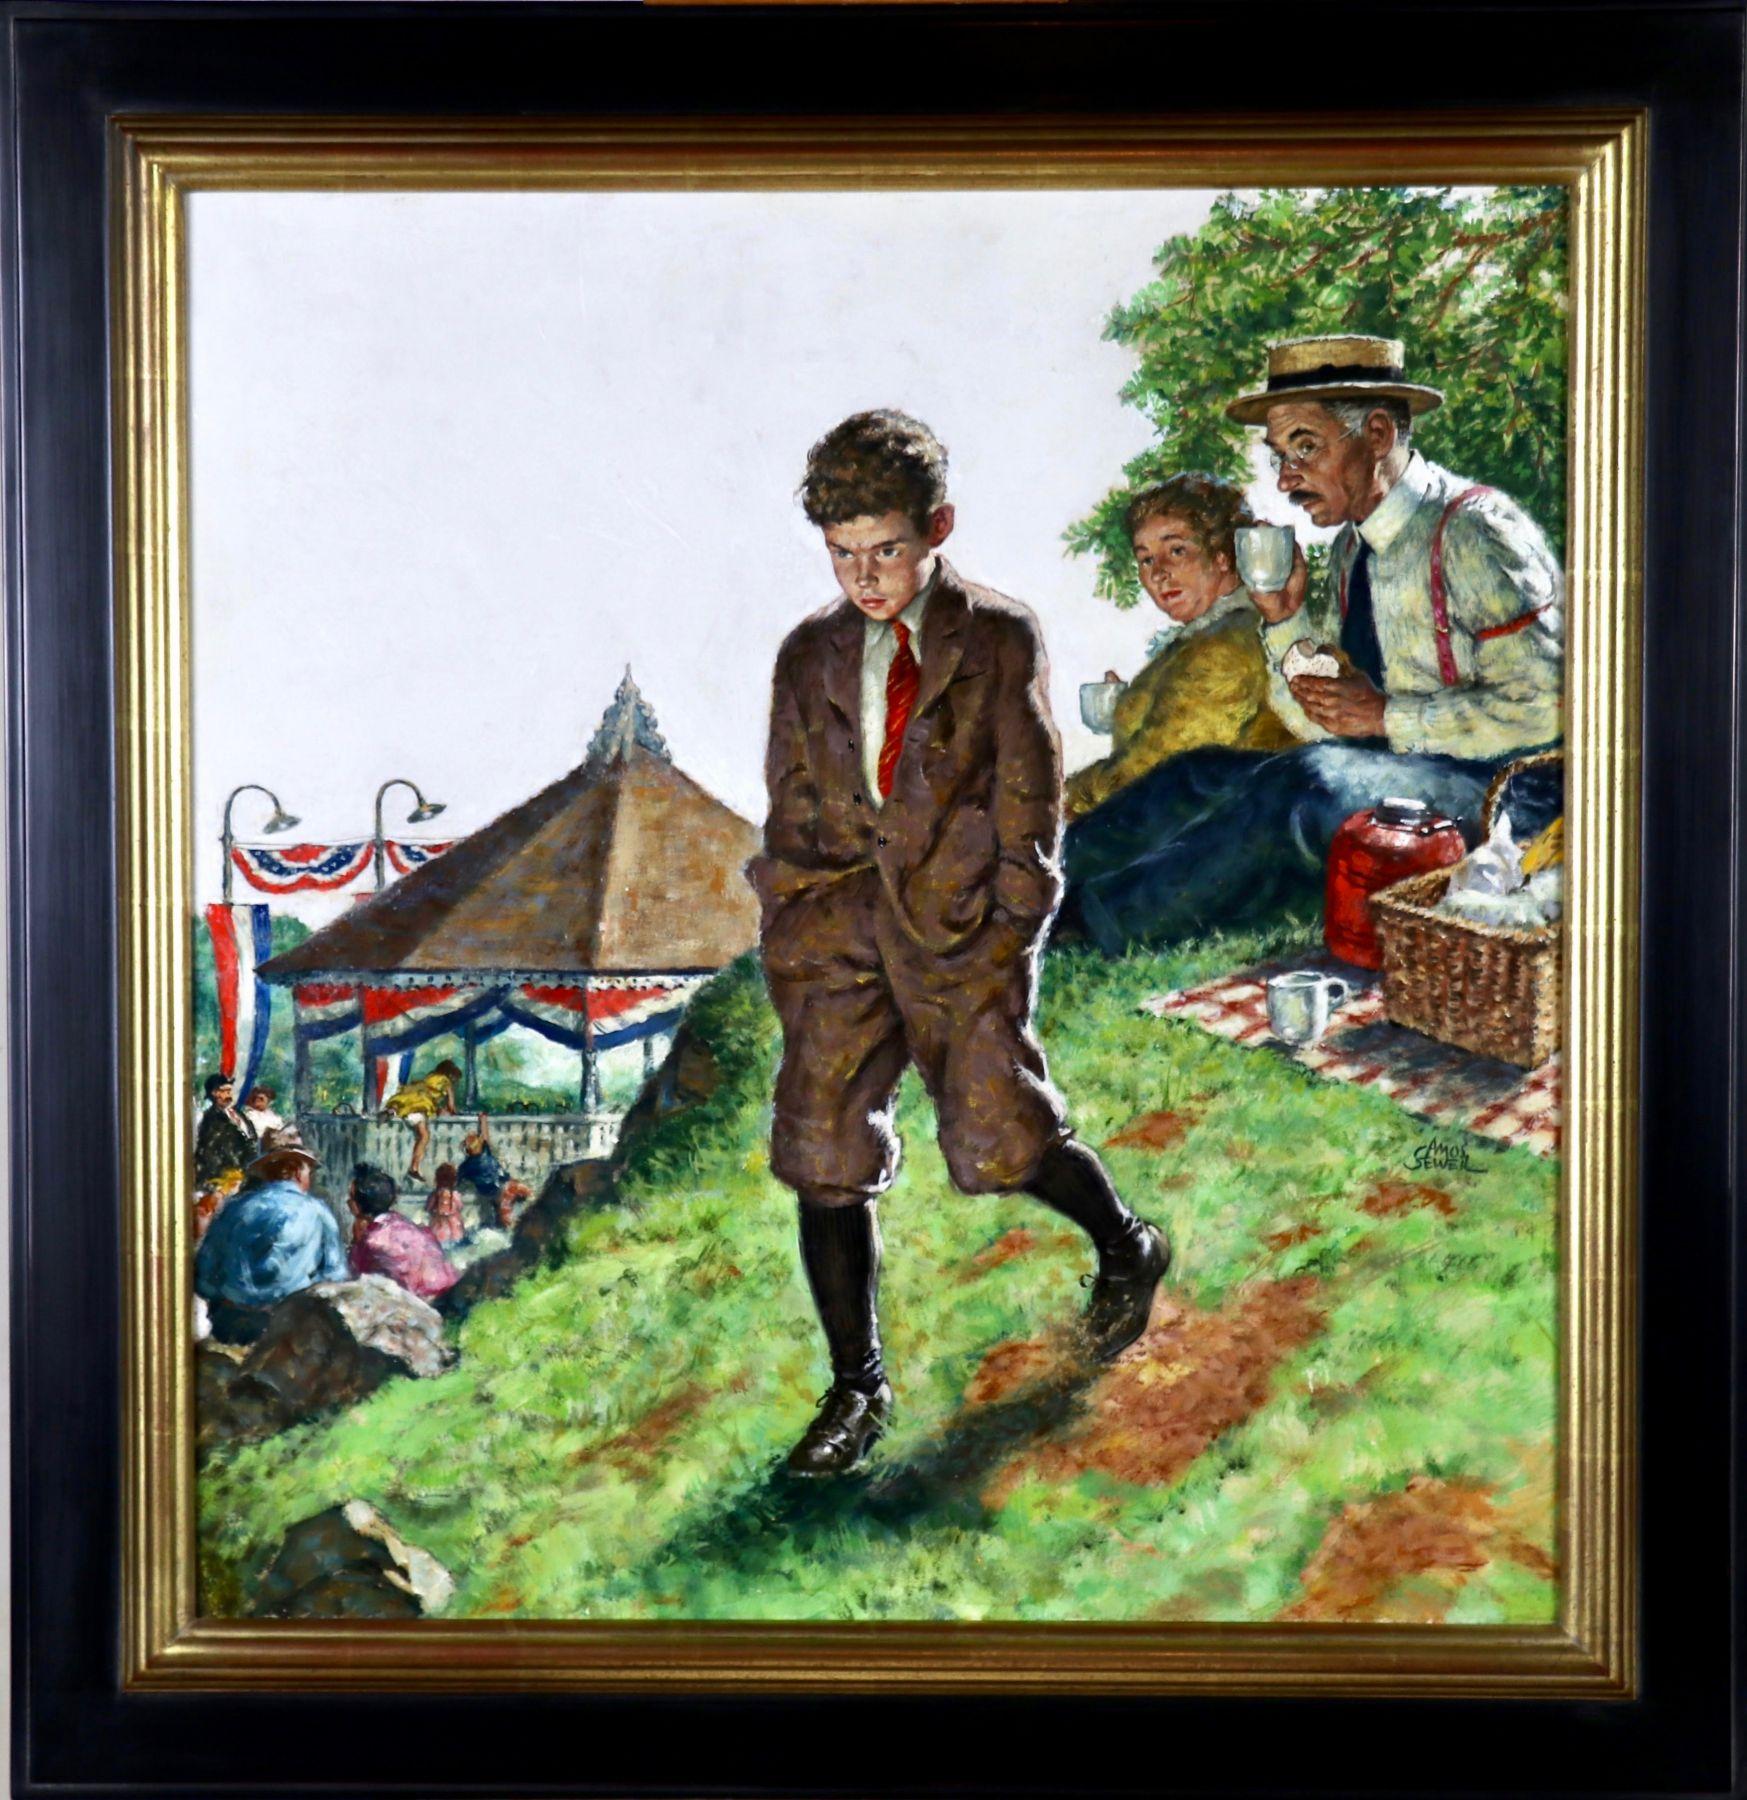 Boy at Carnival - Painting by Amos Sewell